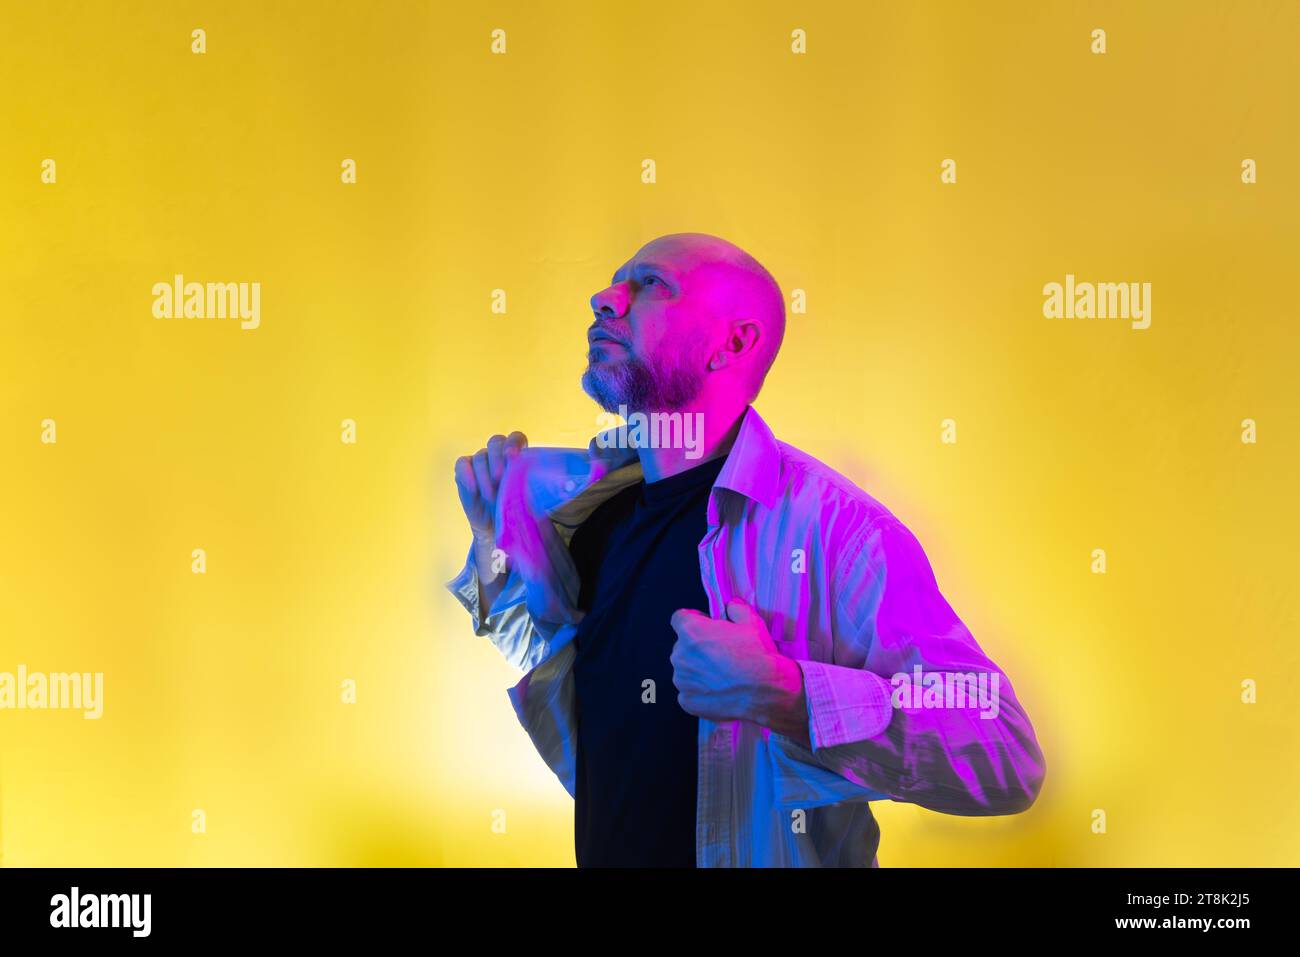 Bearded, bald man opening his shirt. Isolated on yellow background. Stock Photo